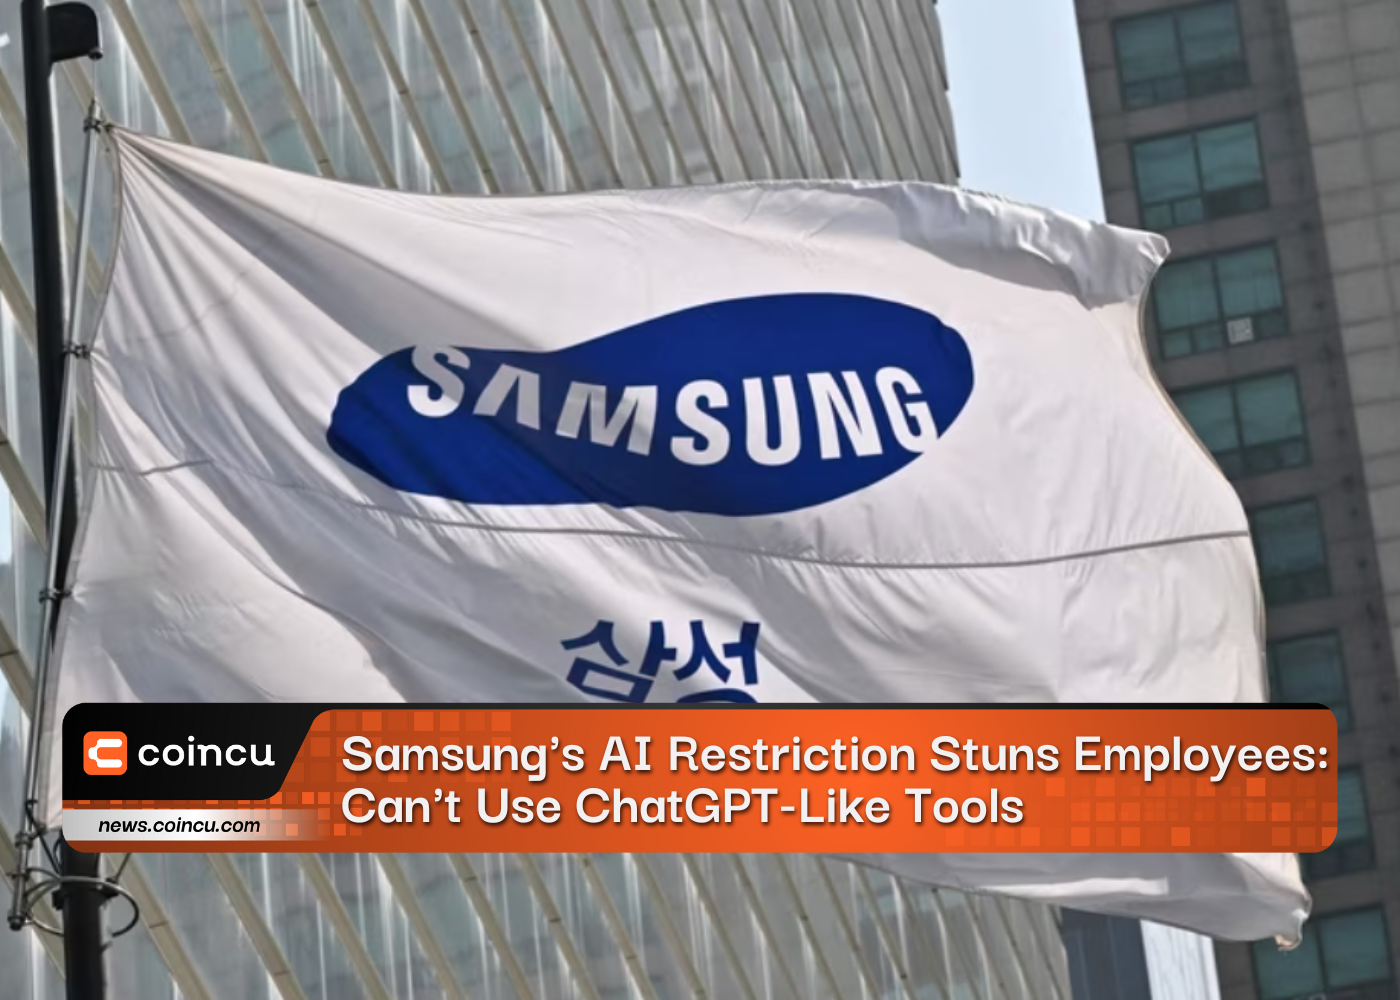 Samsungs AI Restriction Stuns Employees